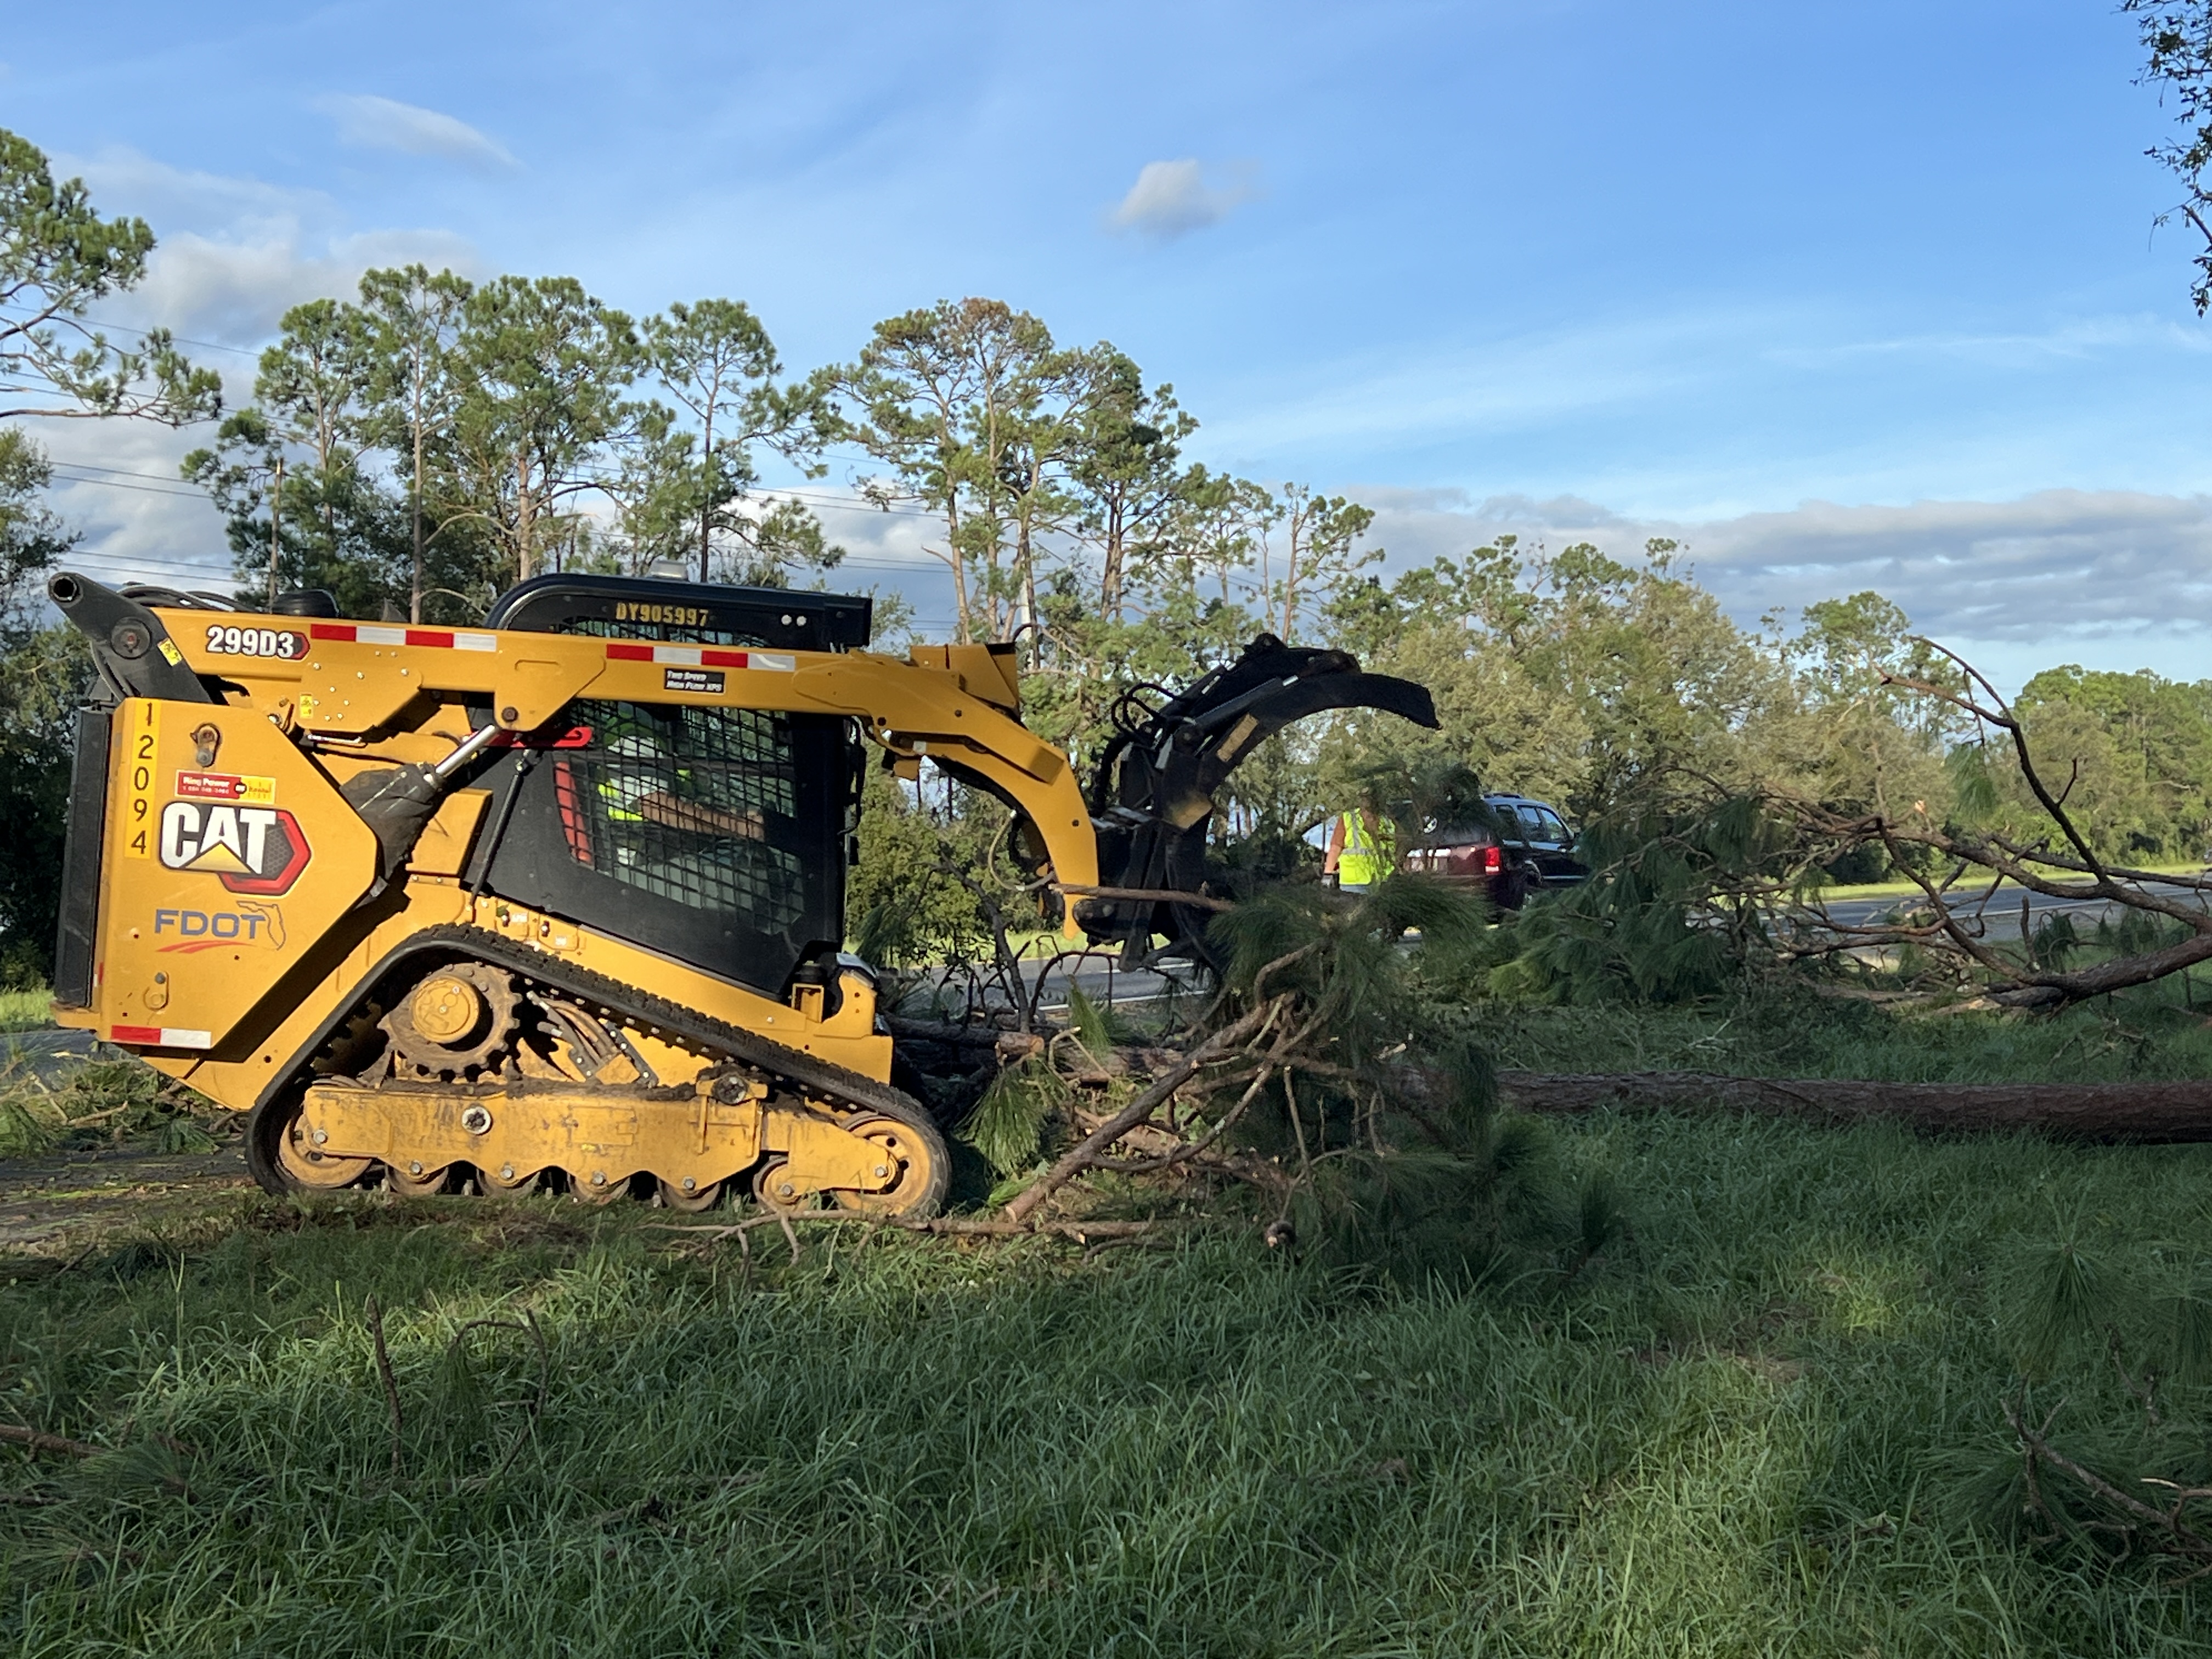 An FDOT Crew moves a downed tree.